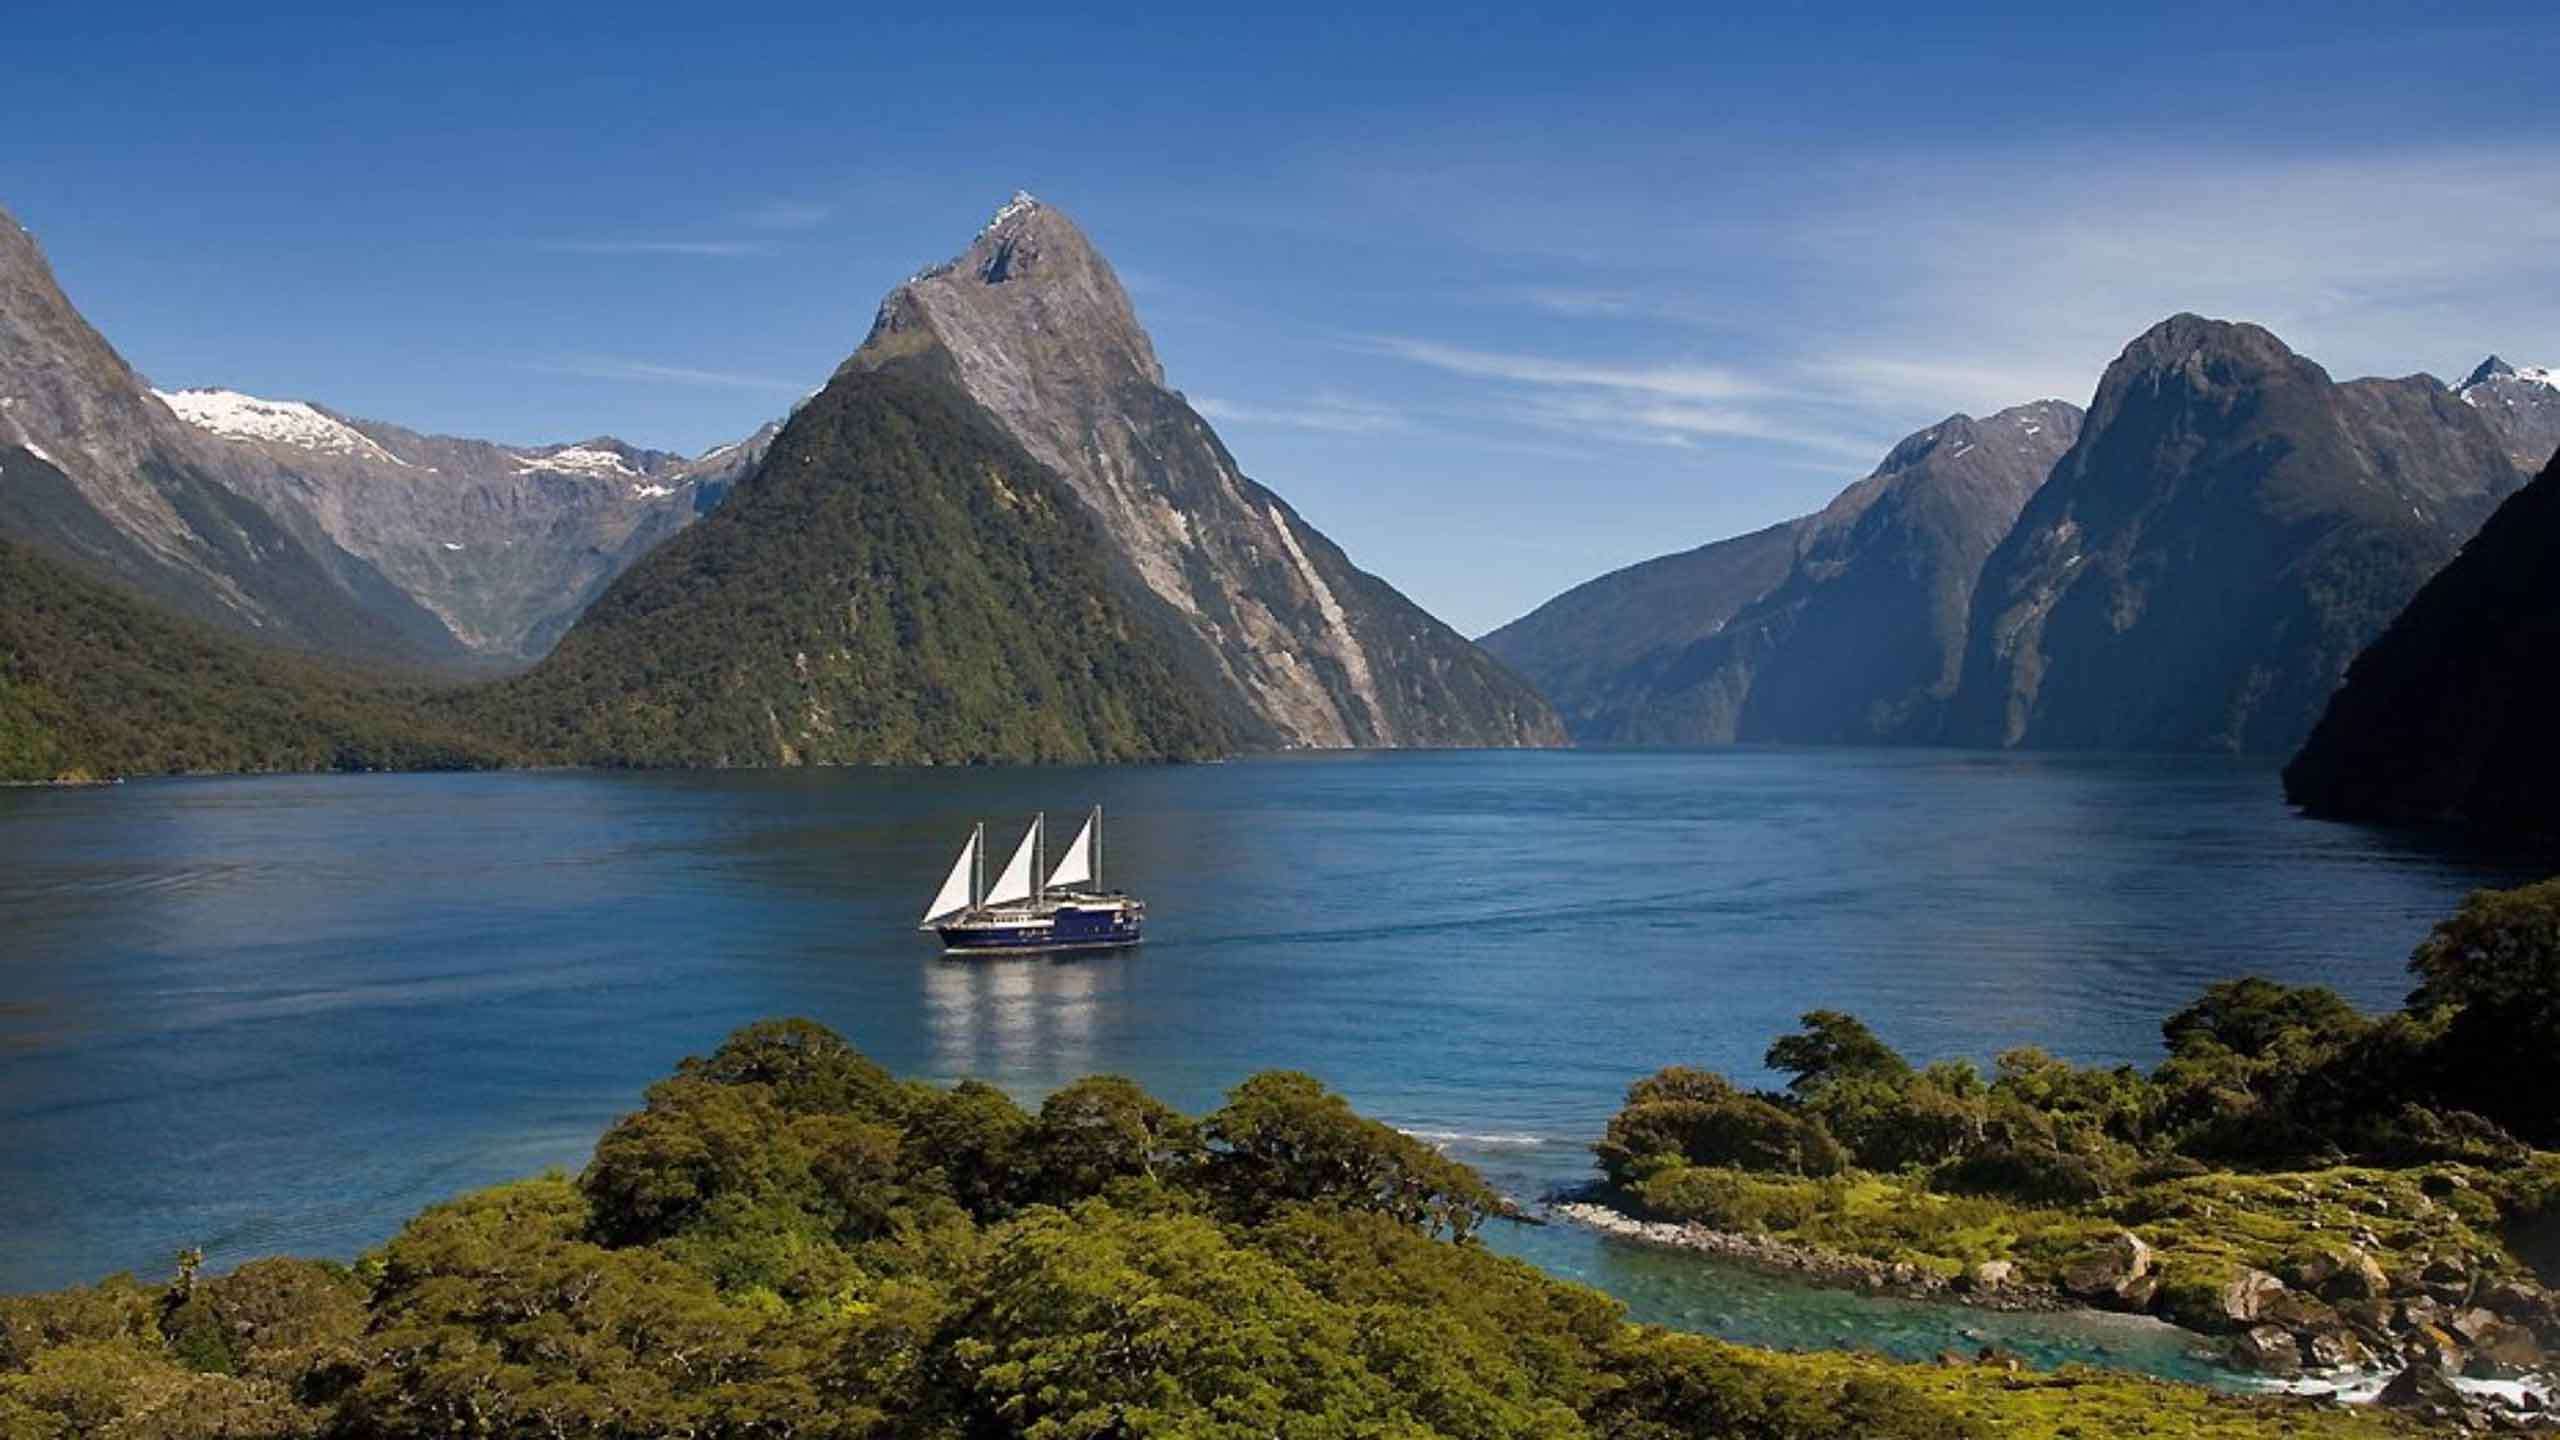 Great Walks Discovery - Milford Sound & Doubtful Sound Cruises 5D4N, Fully Guided